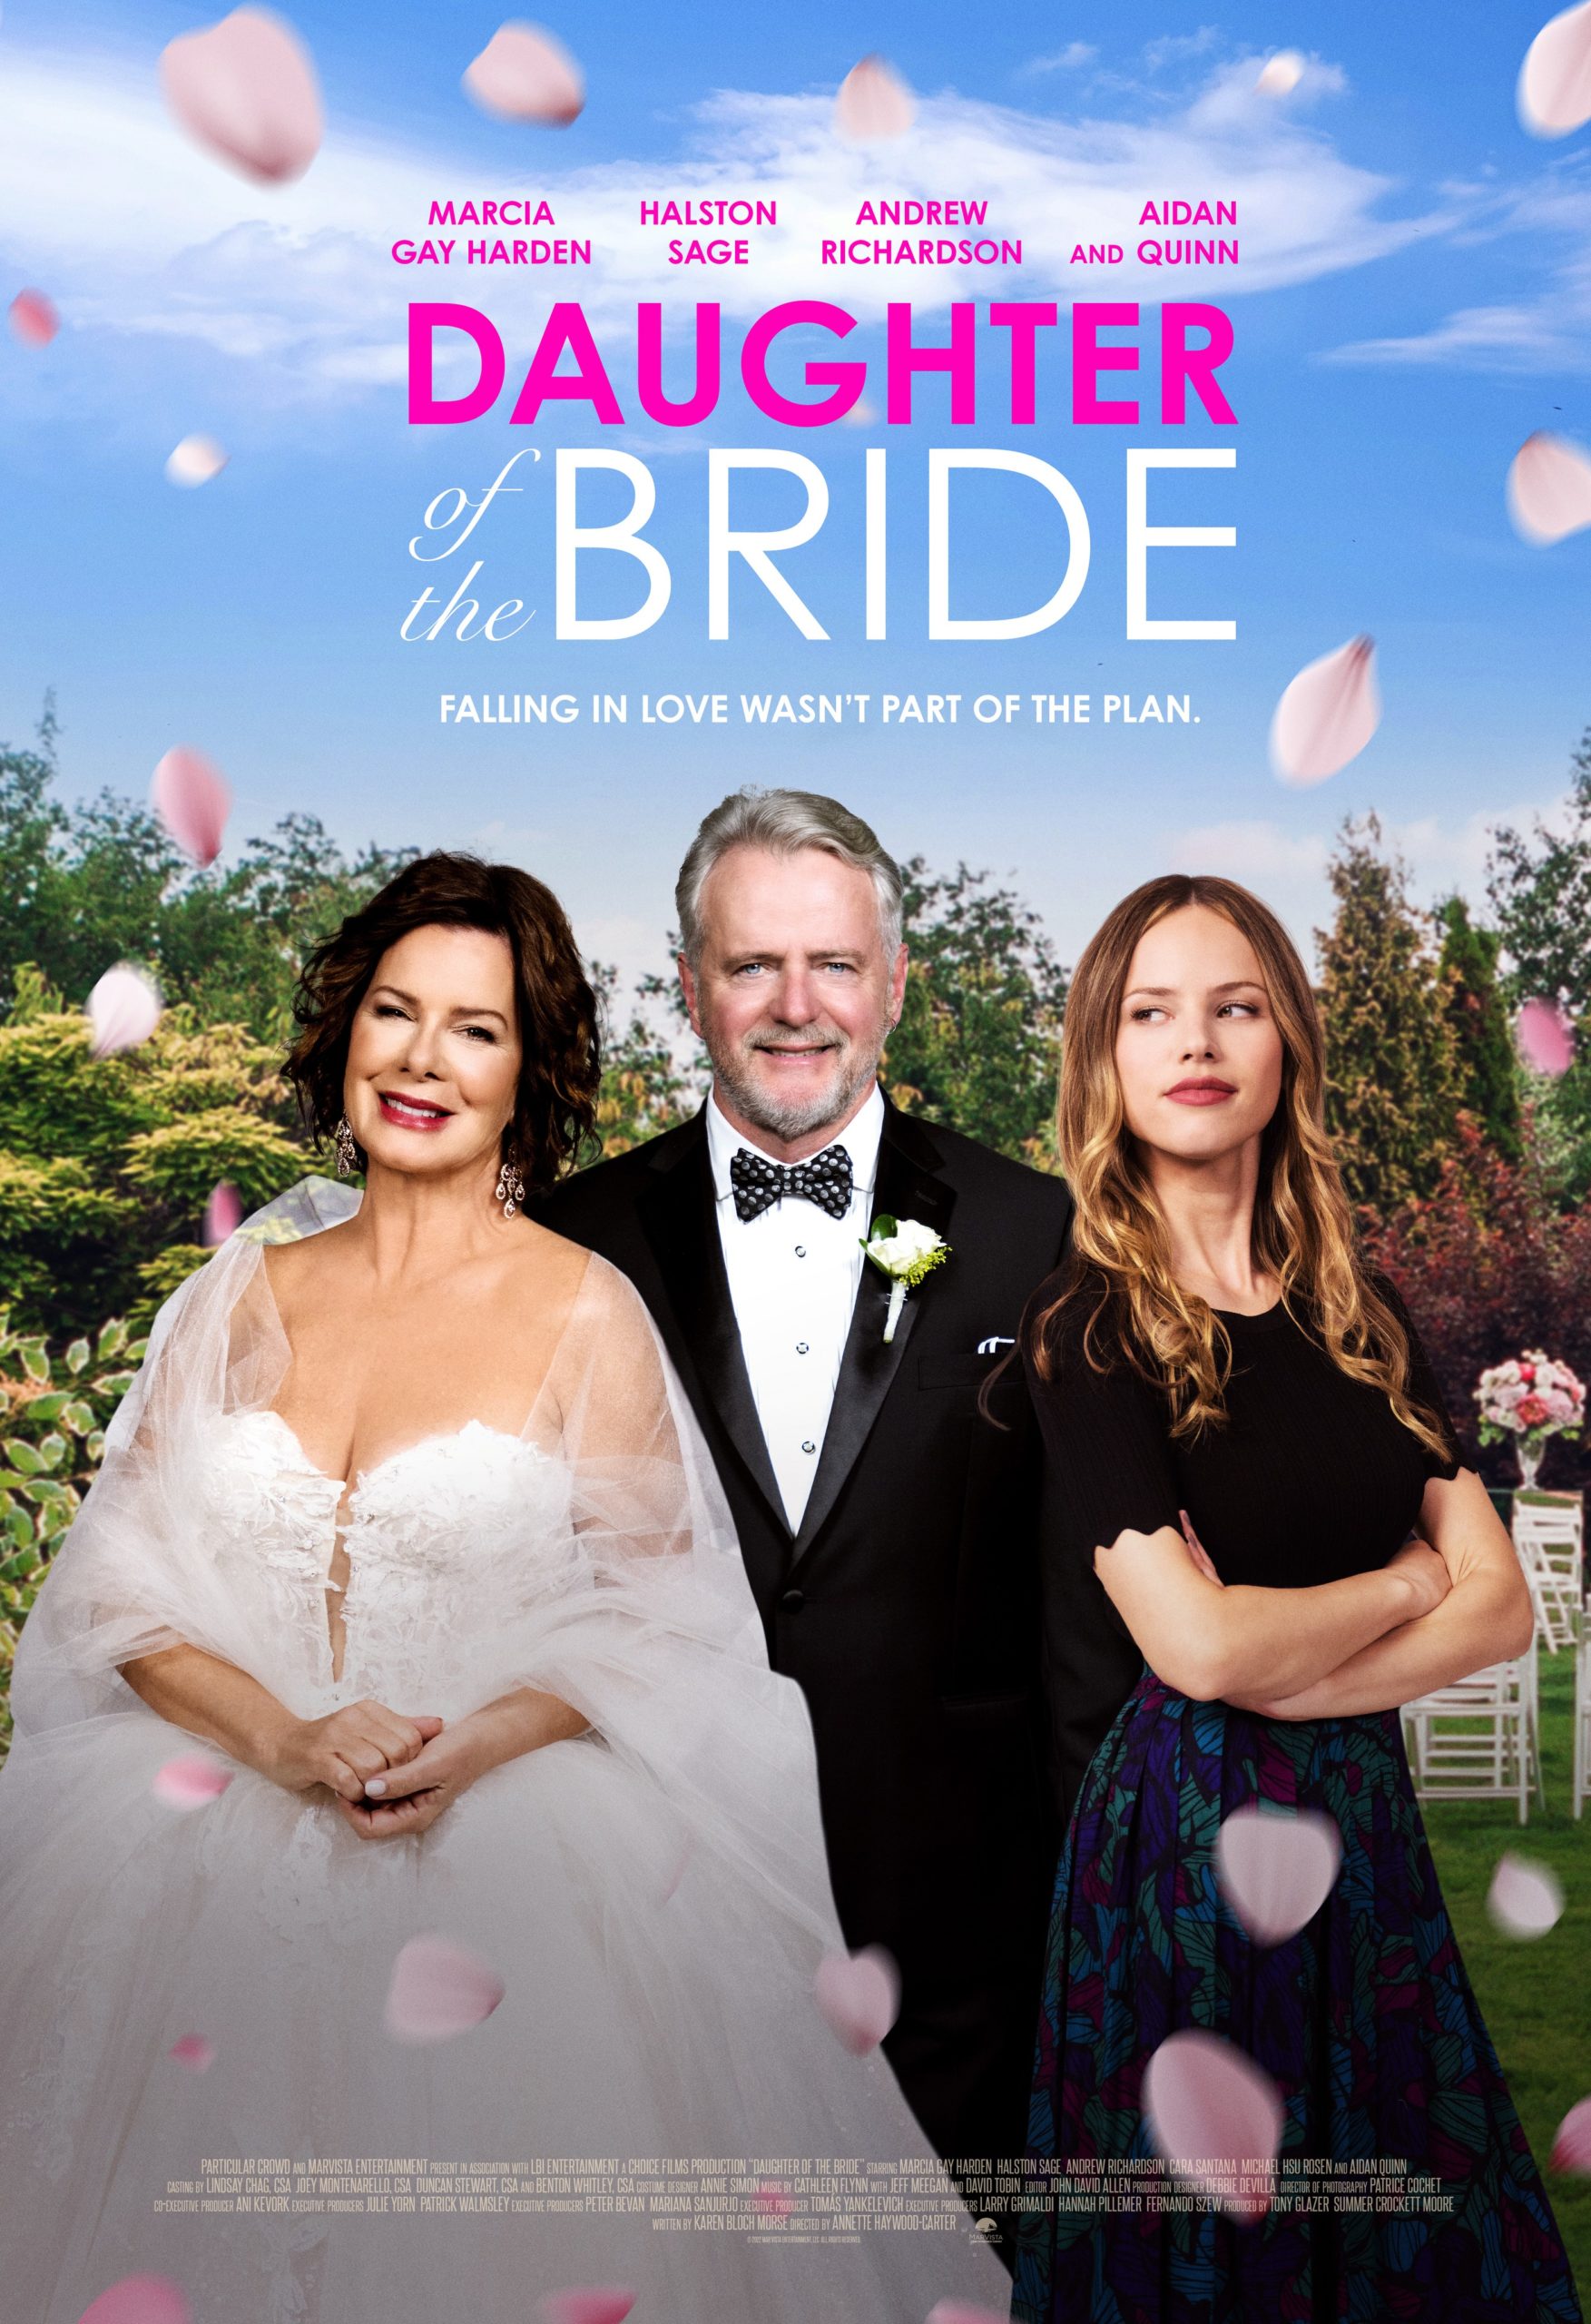 Daughter Of The Bride Ending Explained [SPOILER!]